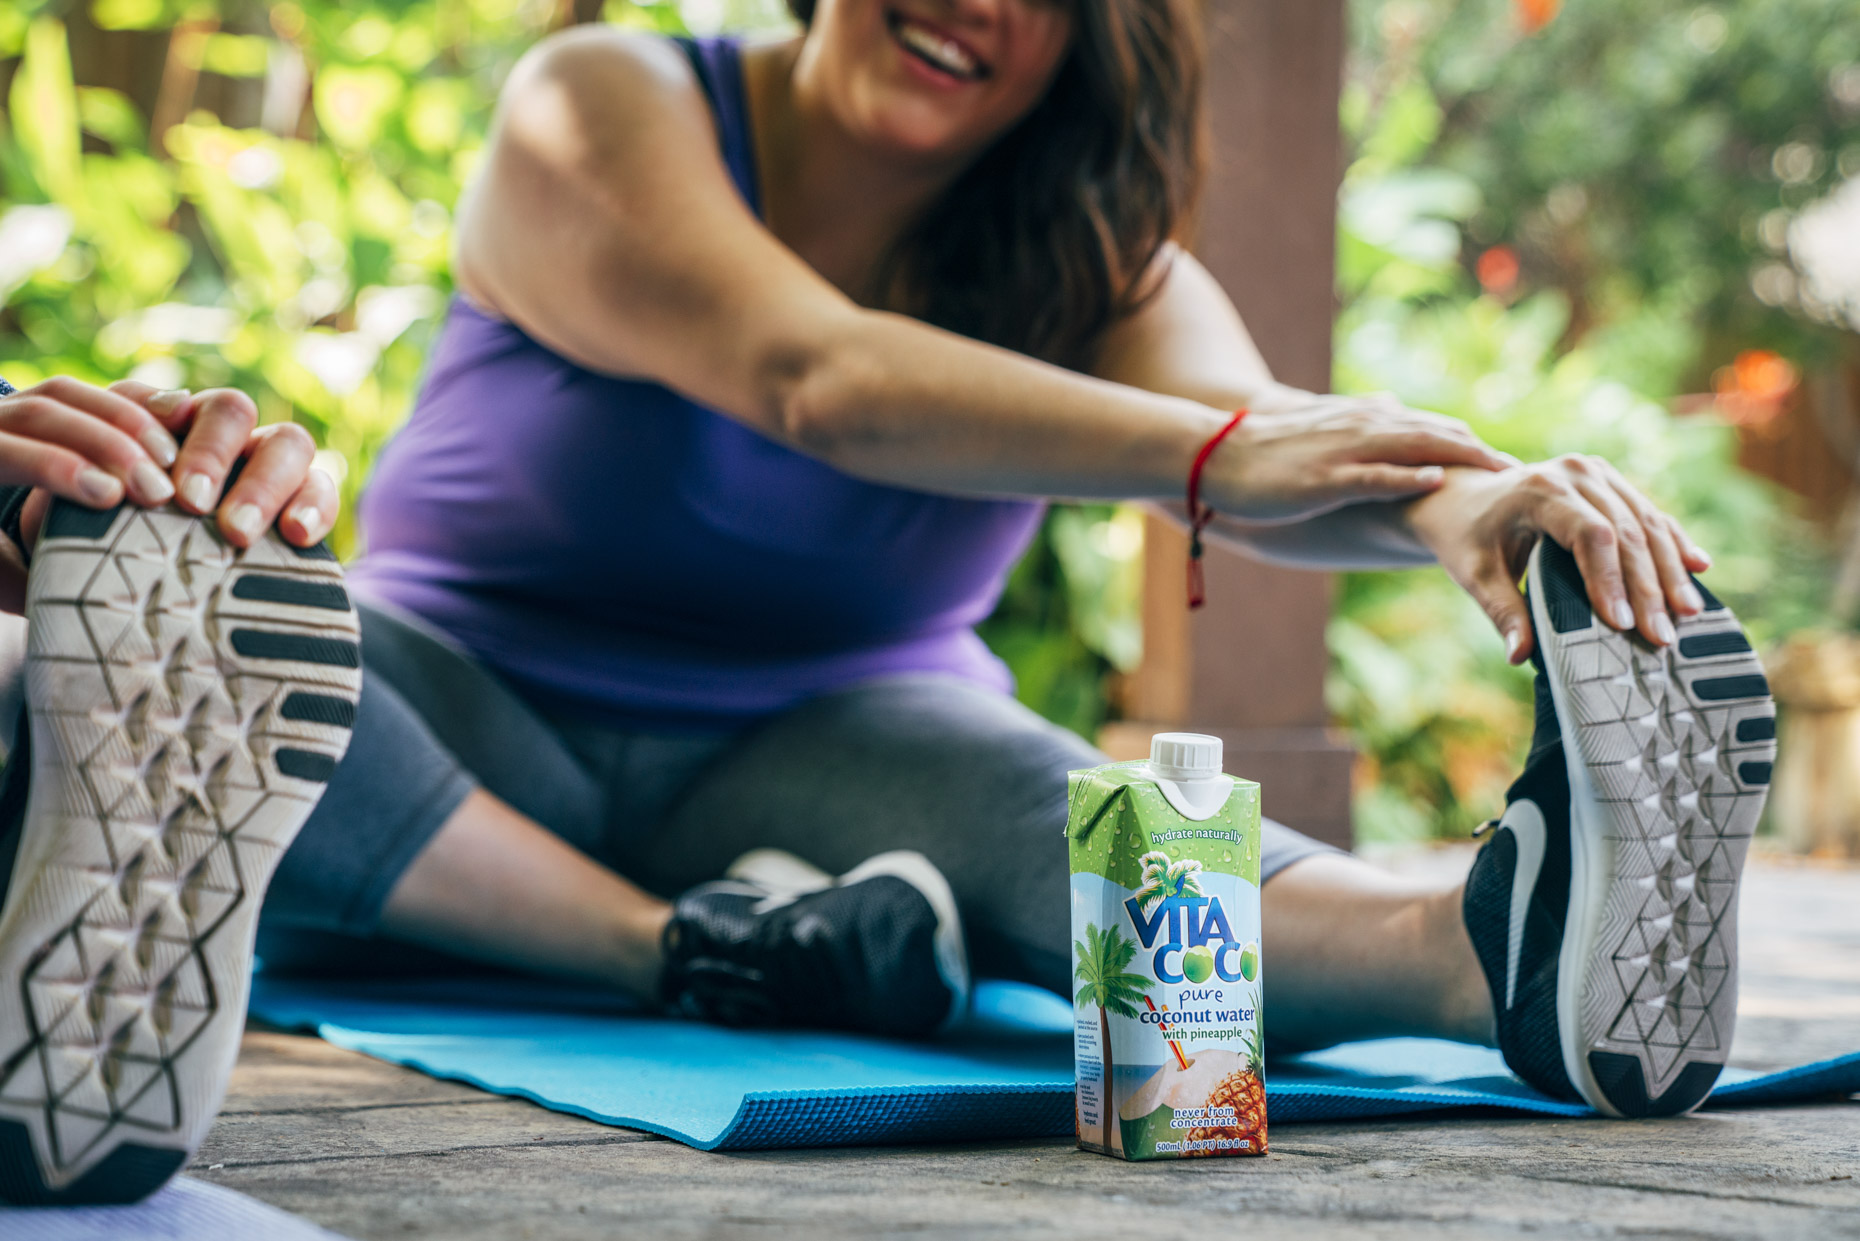 Women stretching on yoga mats with vita coco coconut water